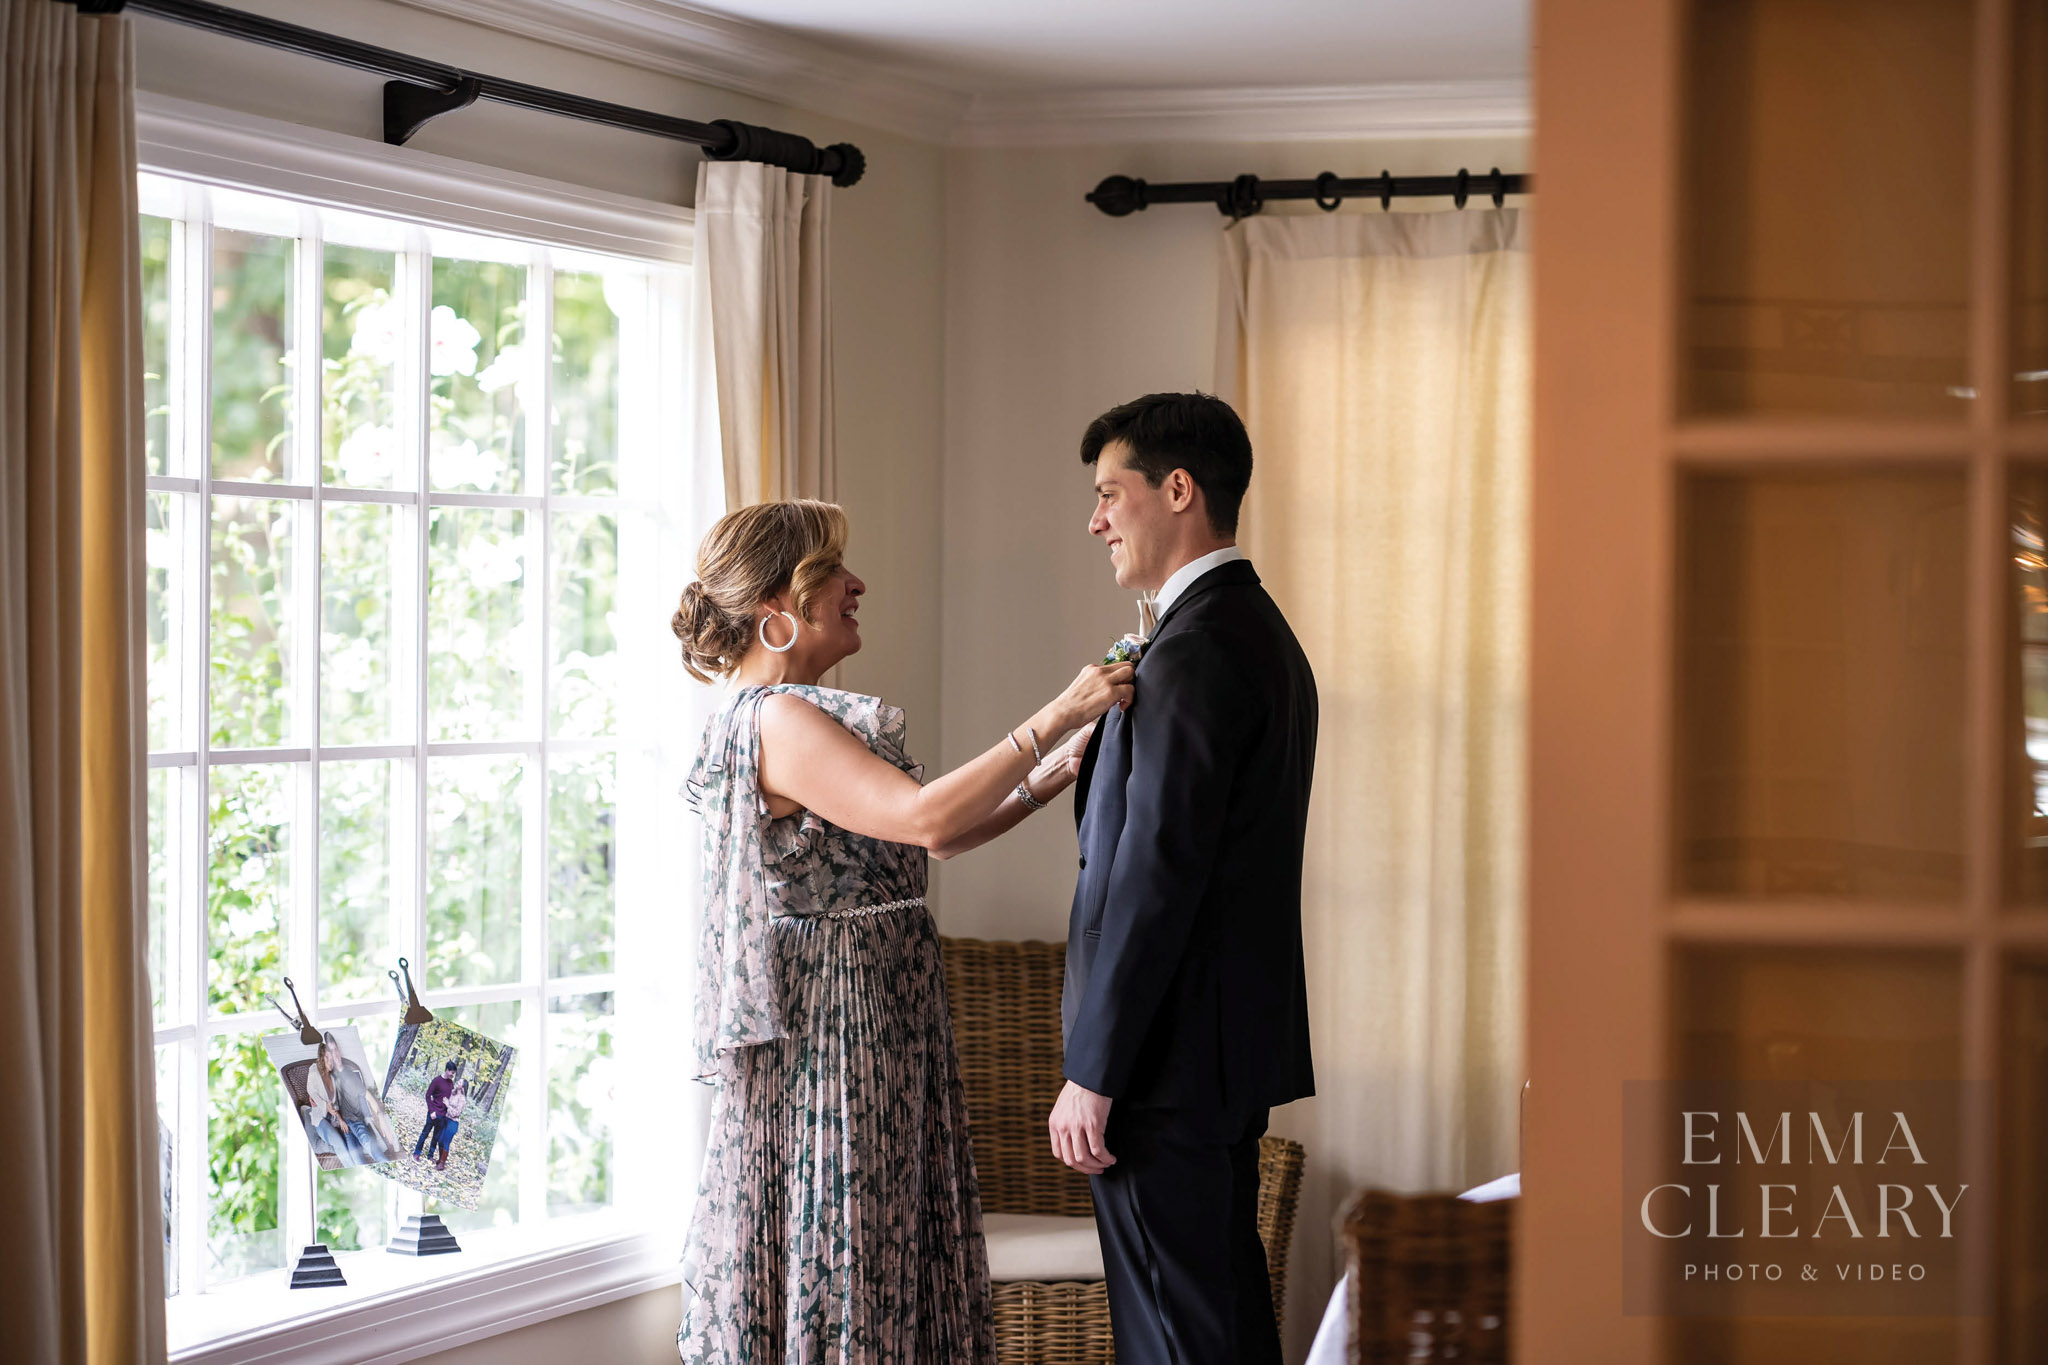 The mother of the groom fixes the bow tie